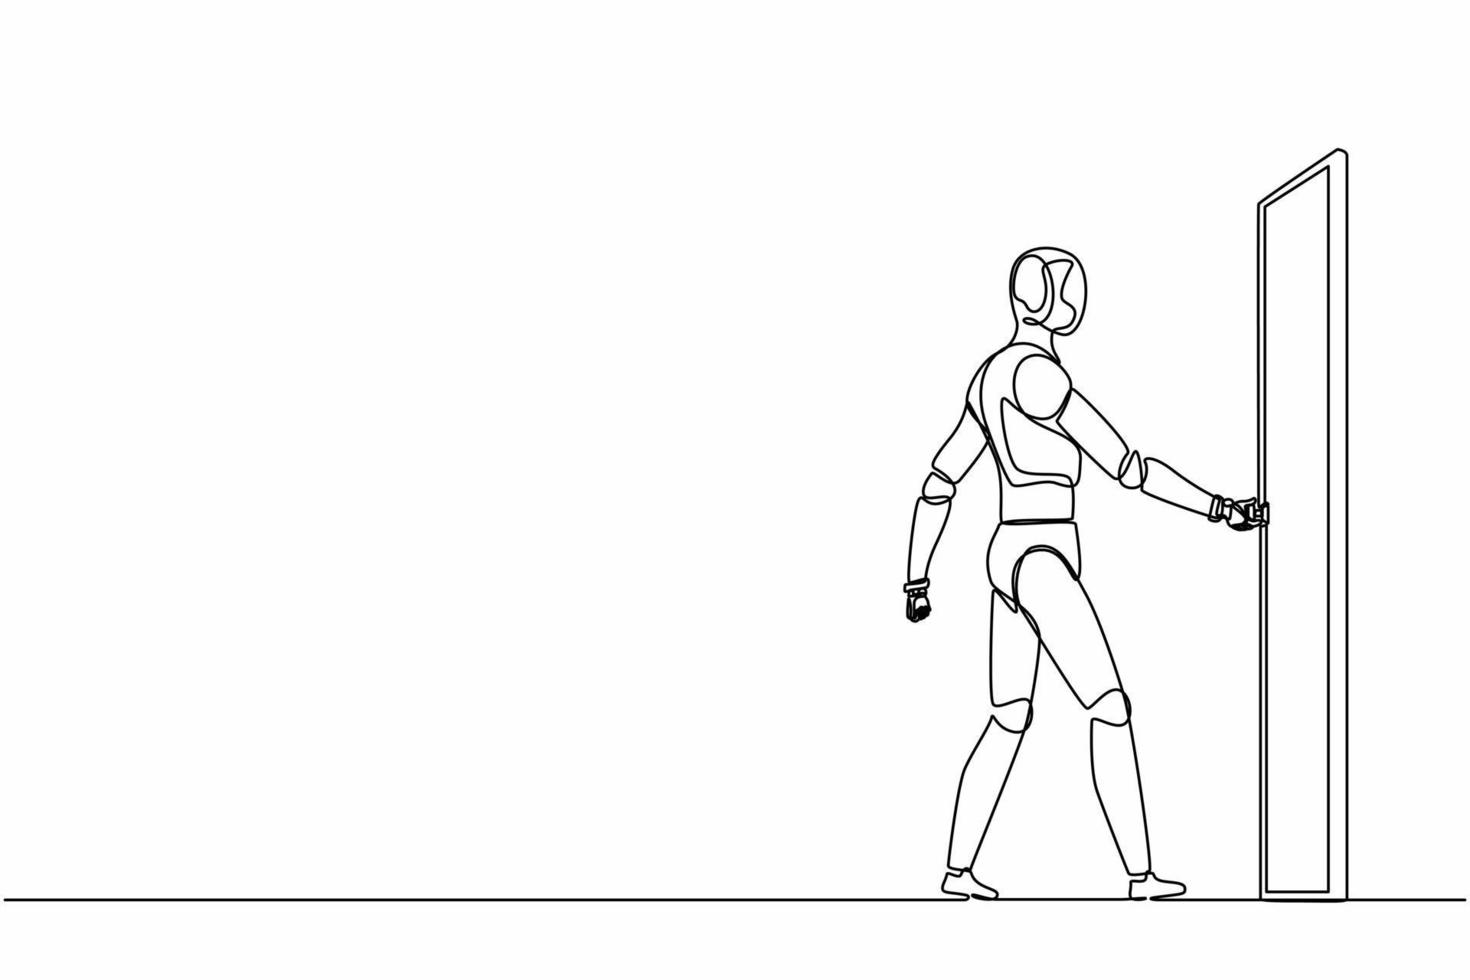 Single continuous line drawing robots holding door knob and enter work space. Modern robotics artificial intelligence technology. Electronic technology industry. One line draw graphic design vector